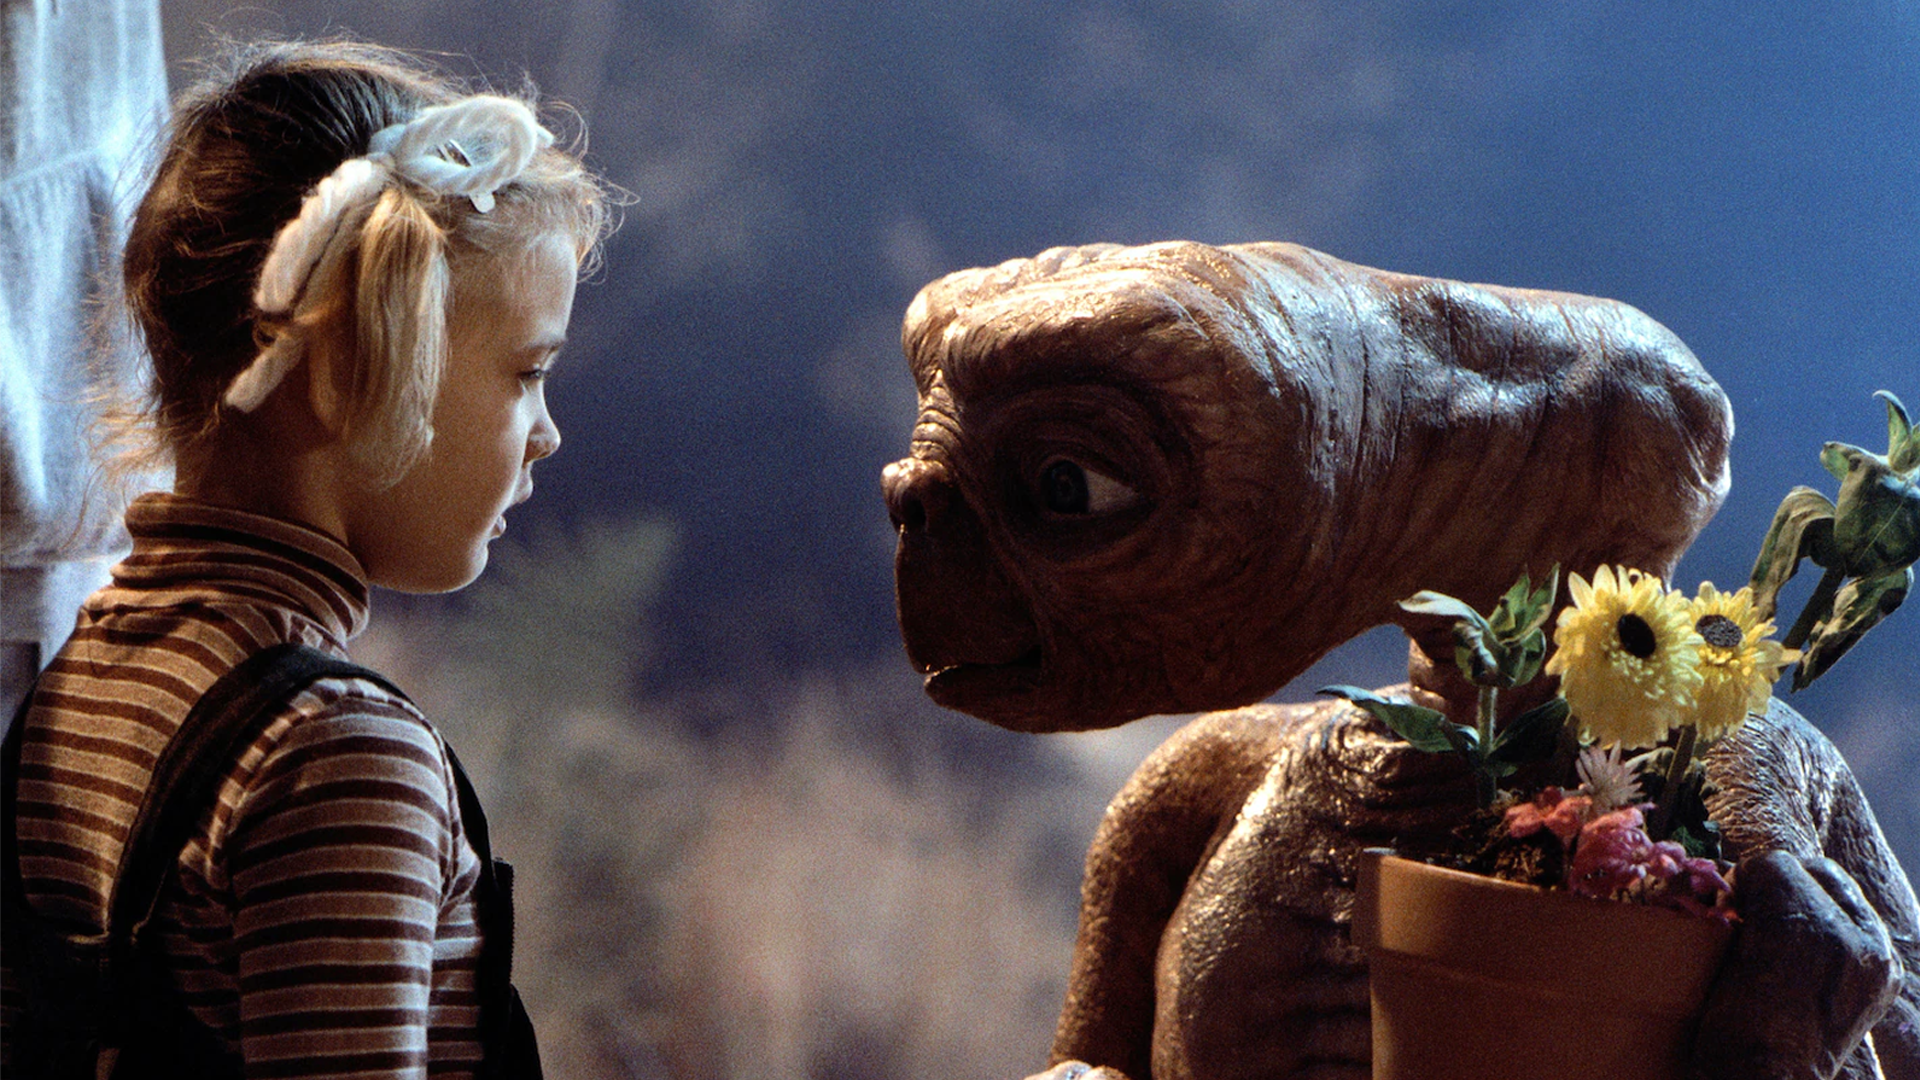 E.T., Elliot and Gertie